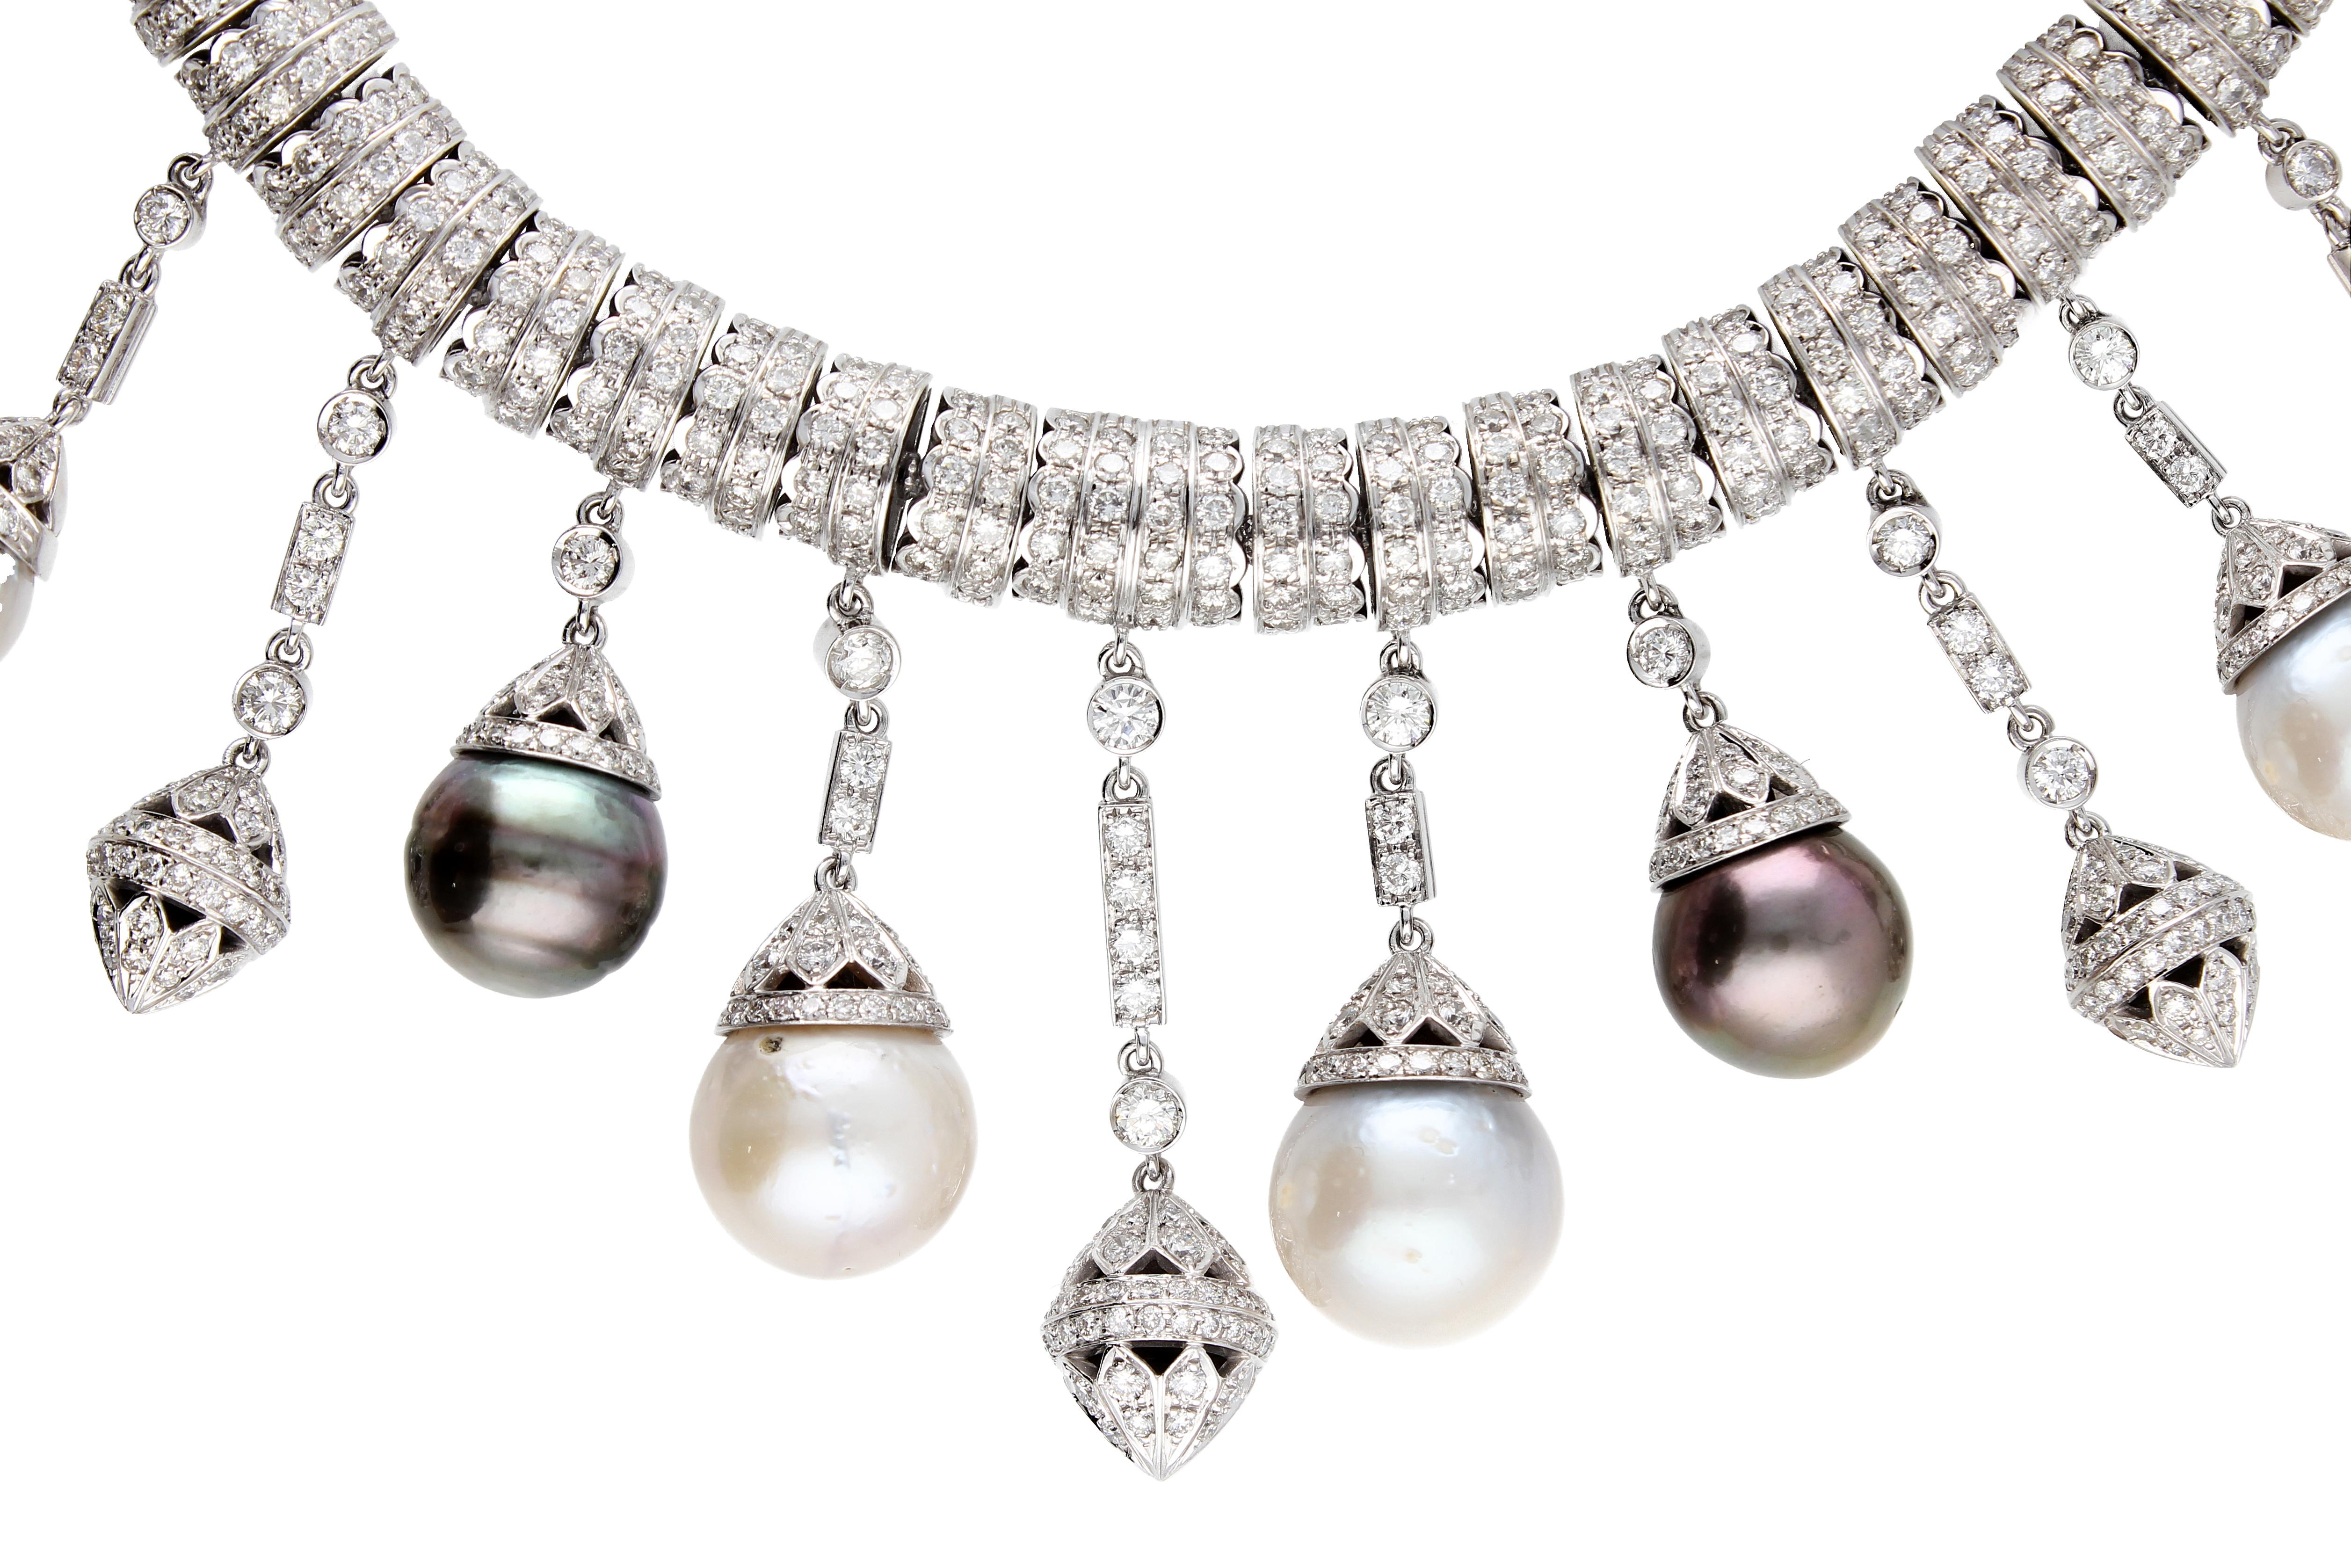 Necklace White Gold and Diamonds, Pendants with White and Black Pearls S.S. For Sale 8